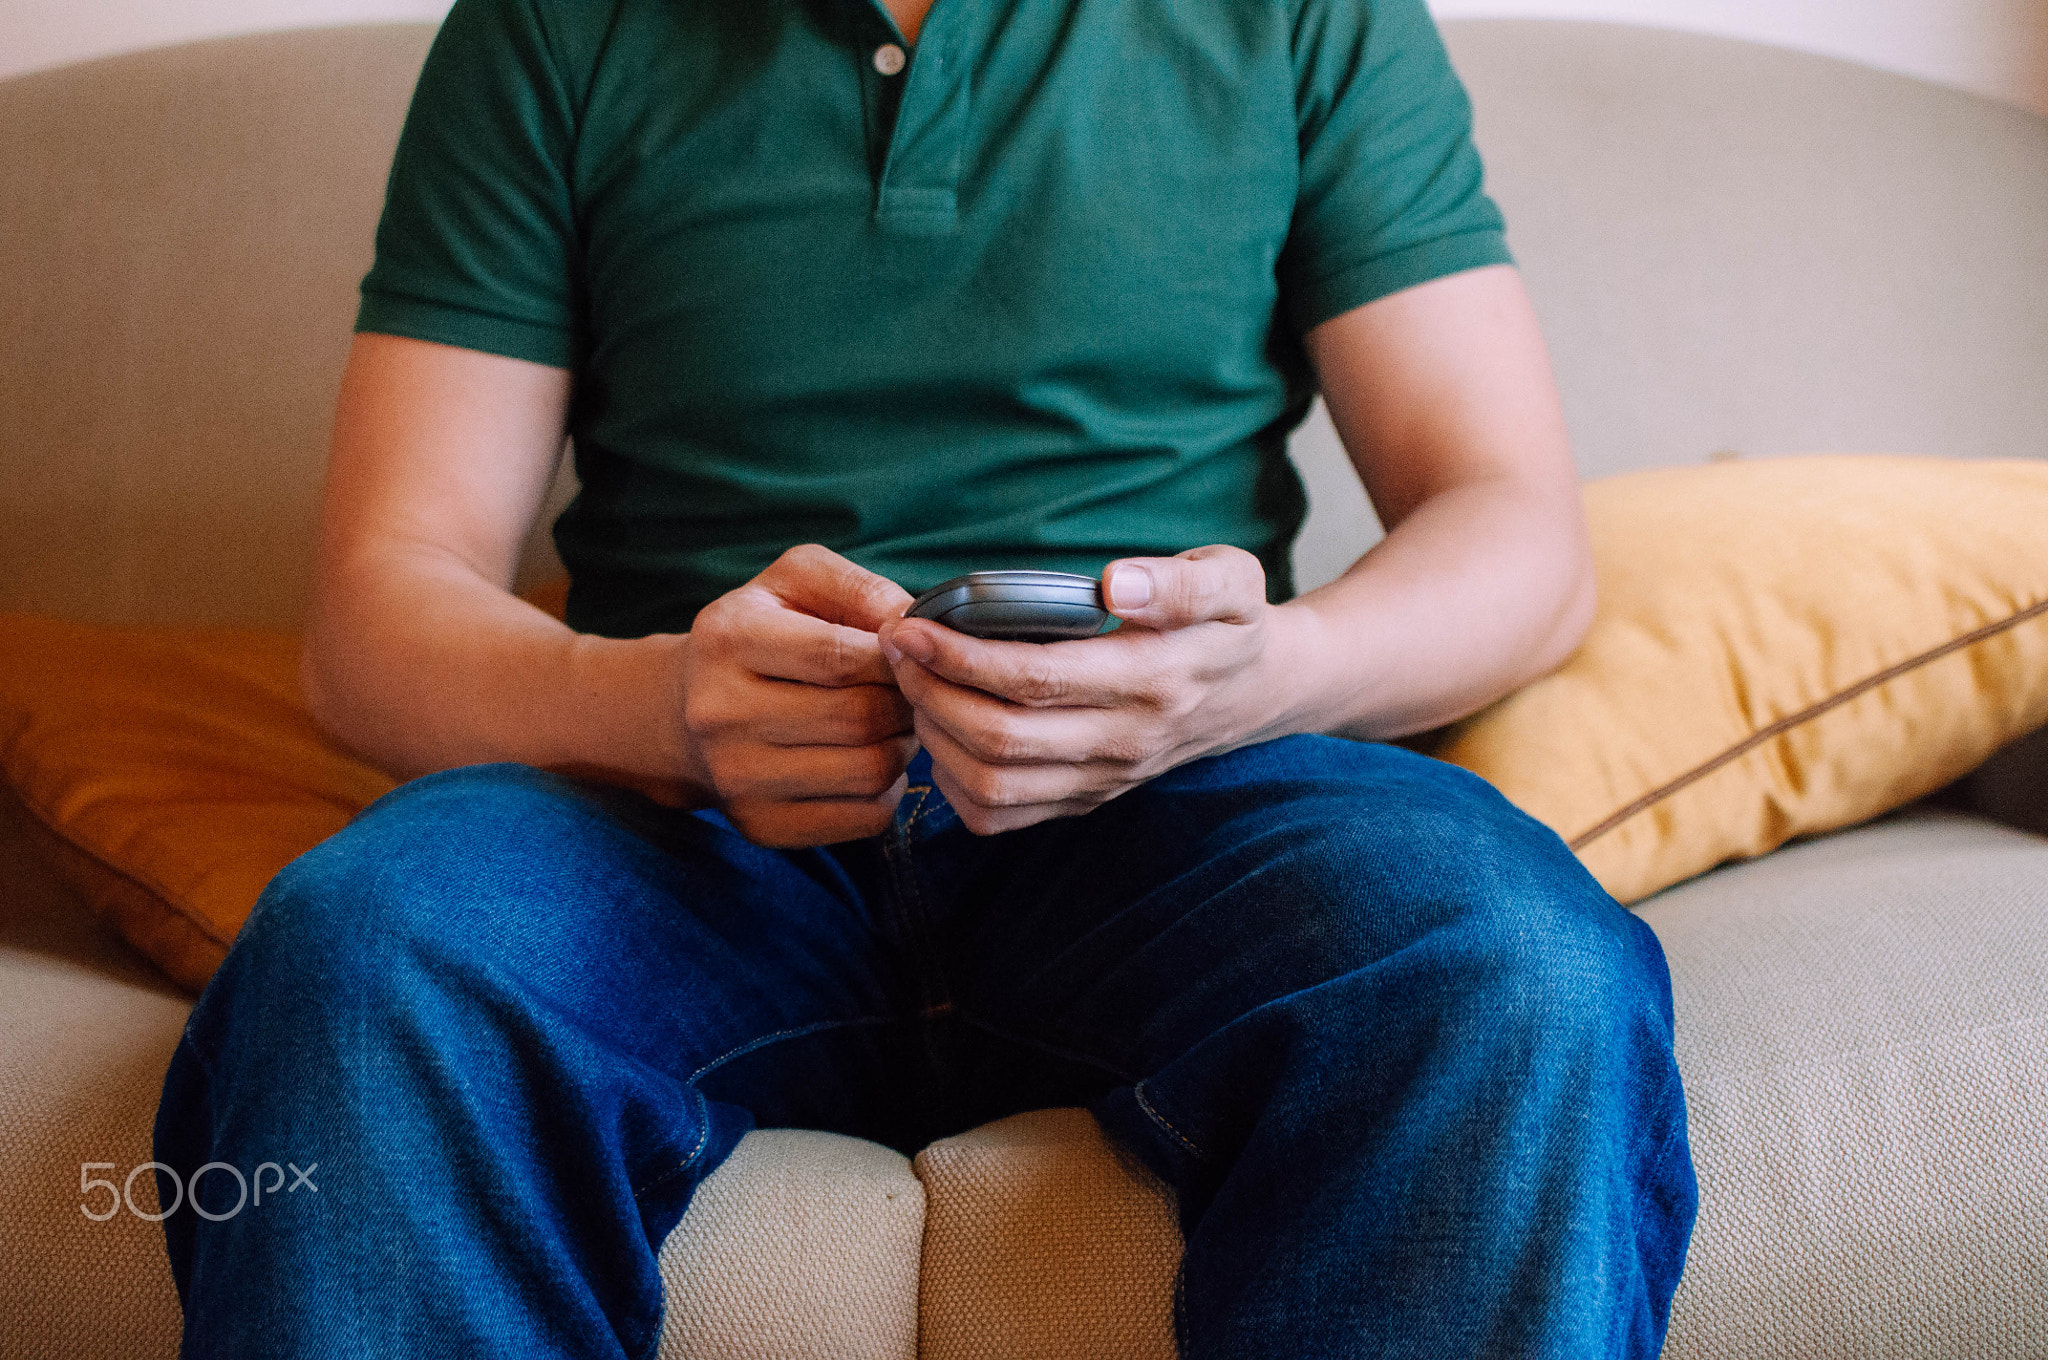 A young male adult is using a device to measure blood sugar while sitting on a couch